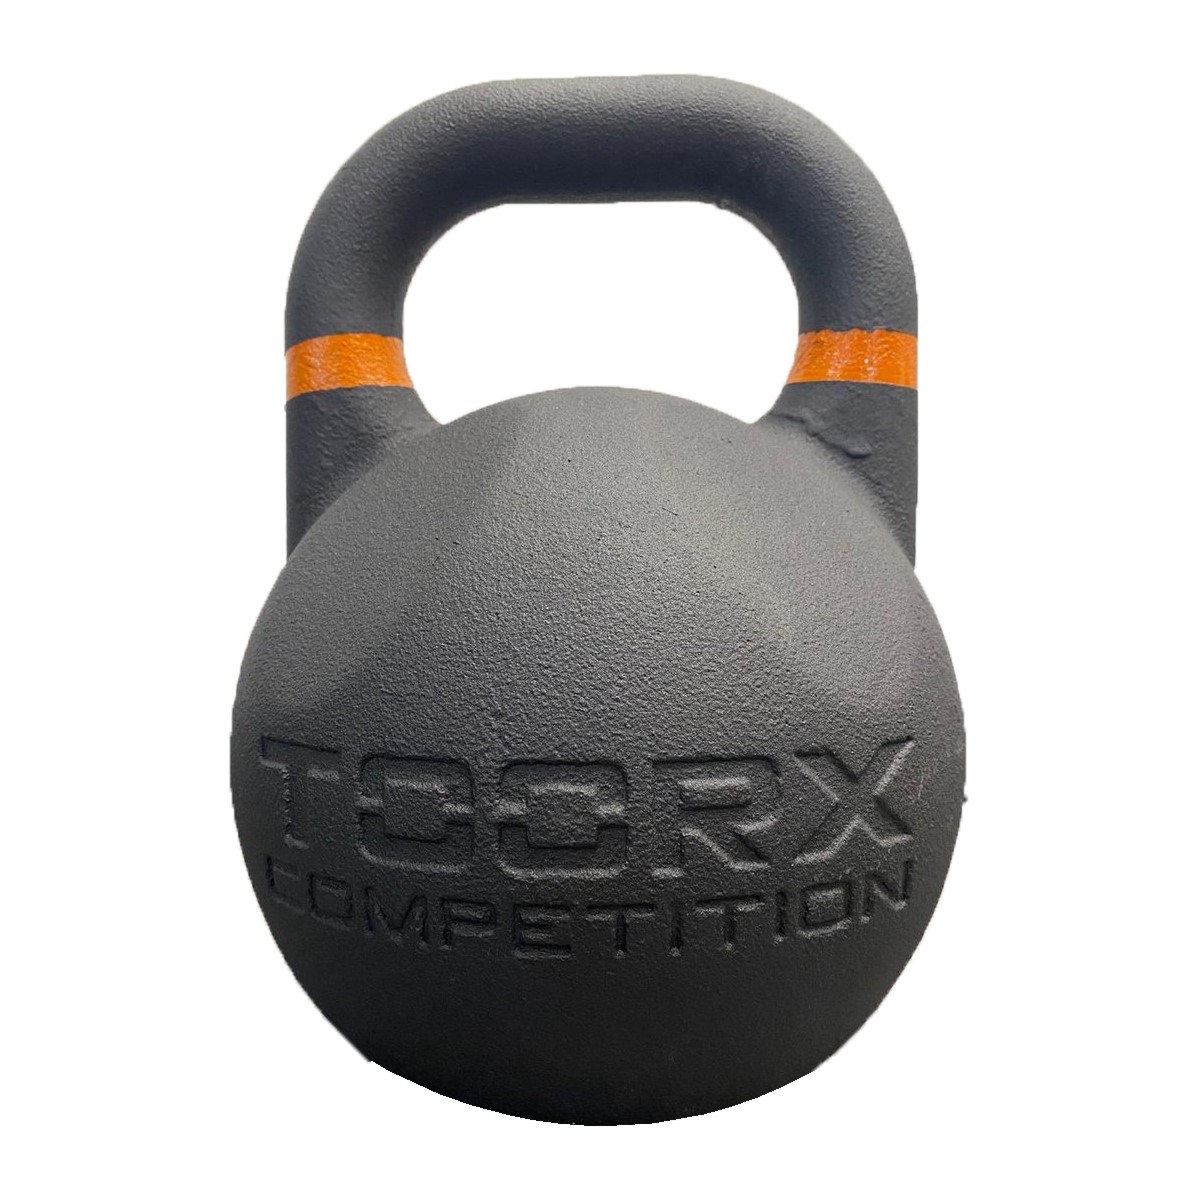 Toorx AKCA Steel Competition Kettlebell - Staal - 10 kg